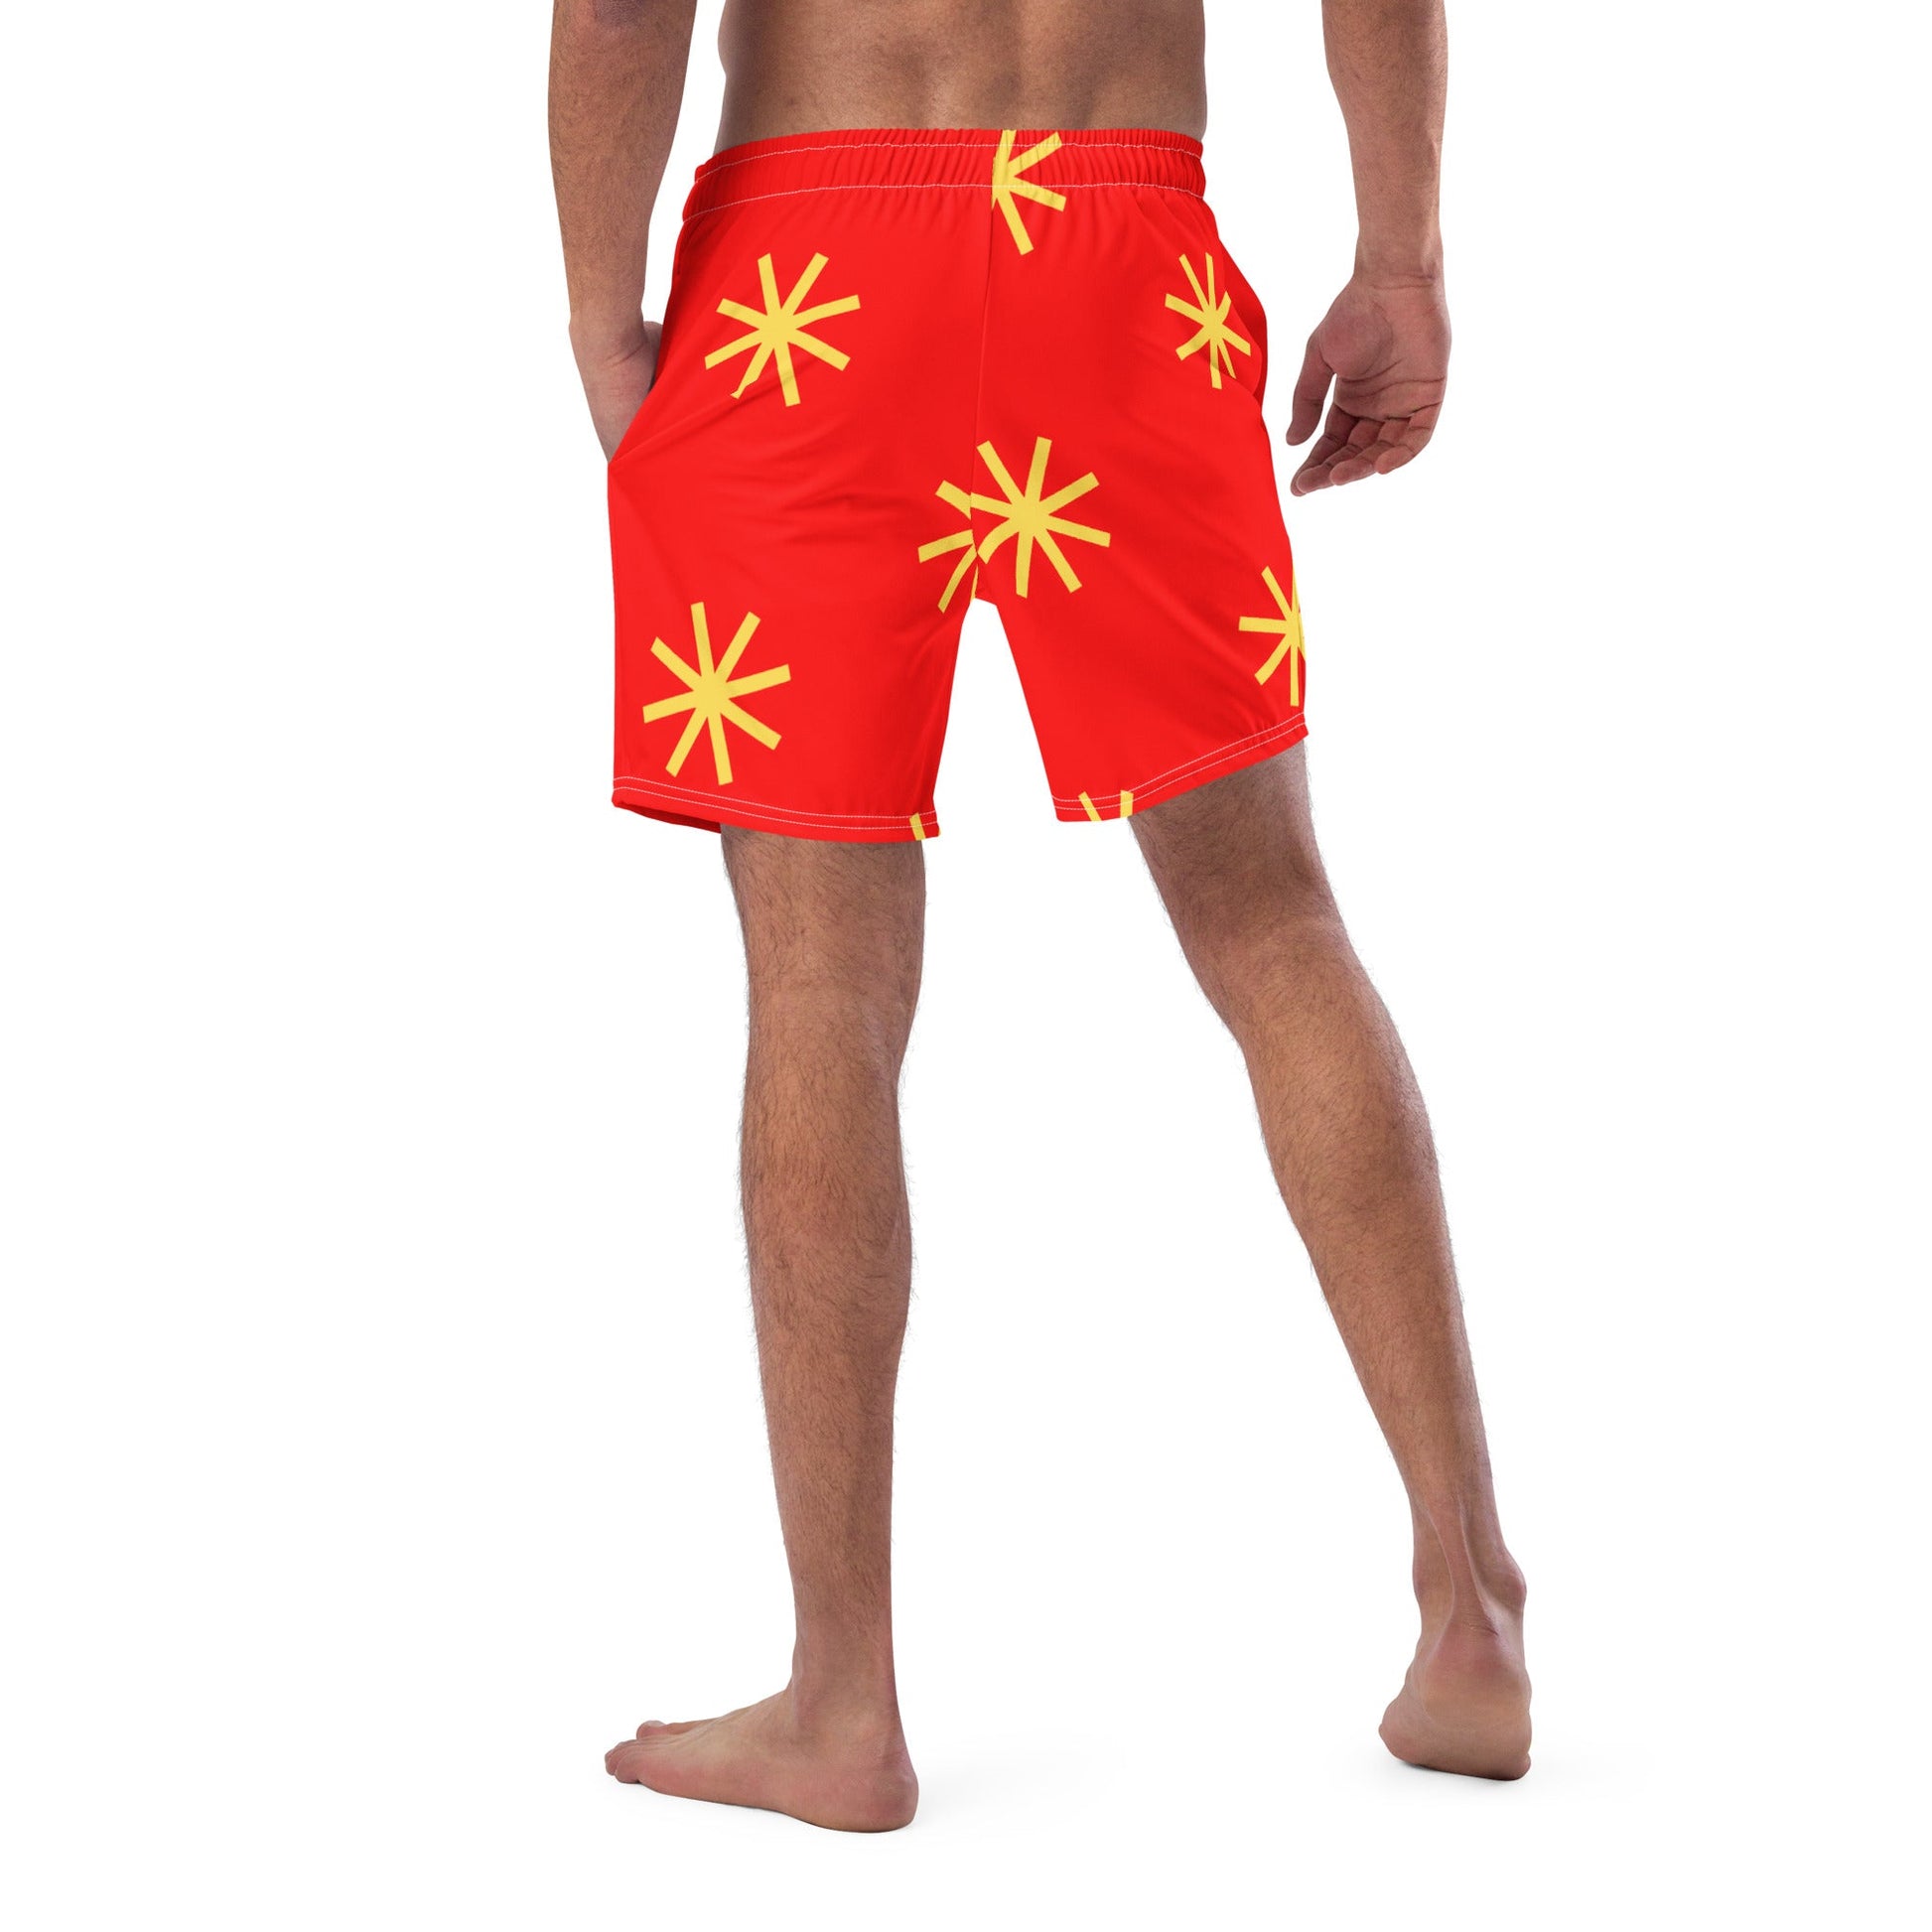 The Chip Men's swim trunks castaway caychip and dalechip costume#tag4##tag5##tag6#